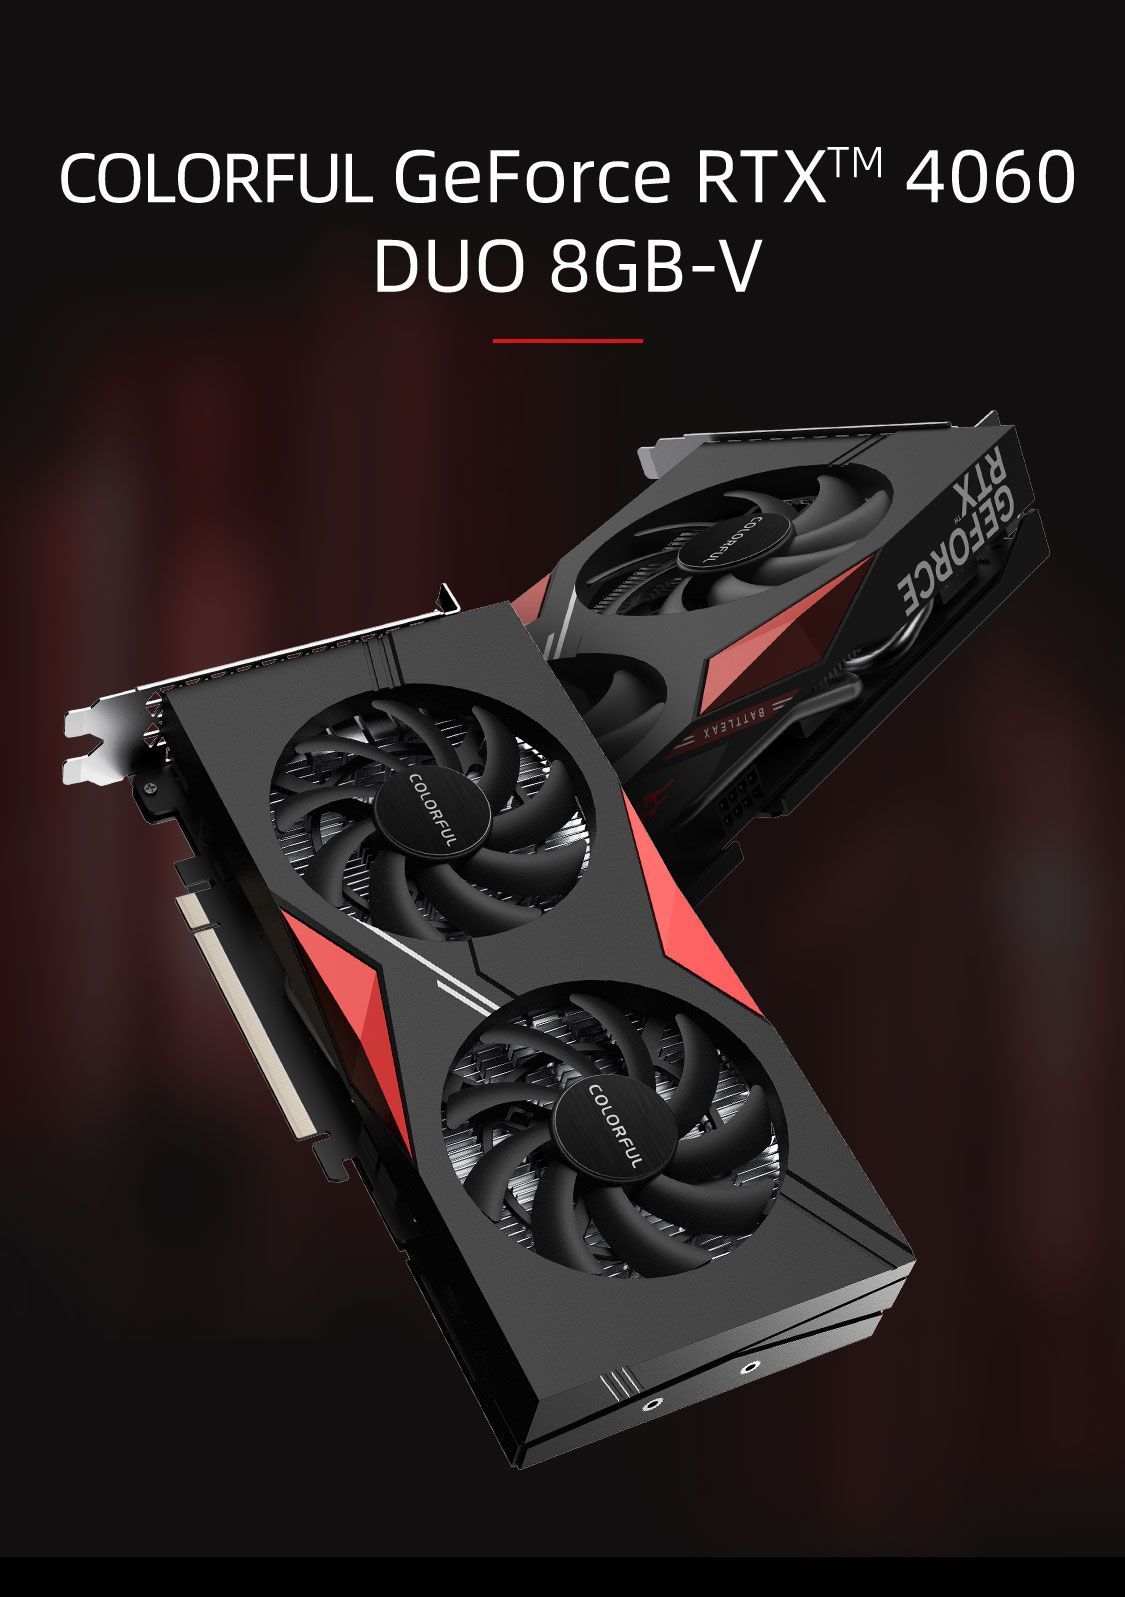 Colorful GEFORCE RTX 4060 8 ГБ. Colorful видеокарта GEFORCE RTX 4060 8 ГБ (RTX 4060 Ultra w Duo OC 8gb). Colorful GEFORCE RTX 4060 8 ГБ Mini. Видеокарта в ДНР. Colorful rtx 4060 nb duo